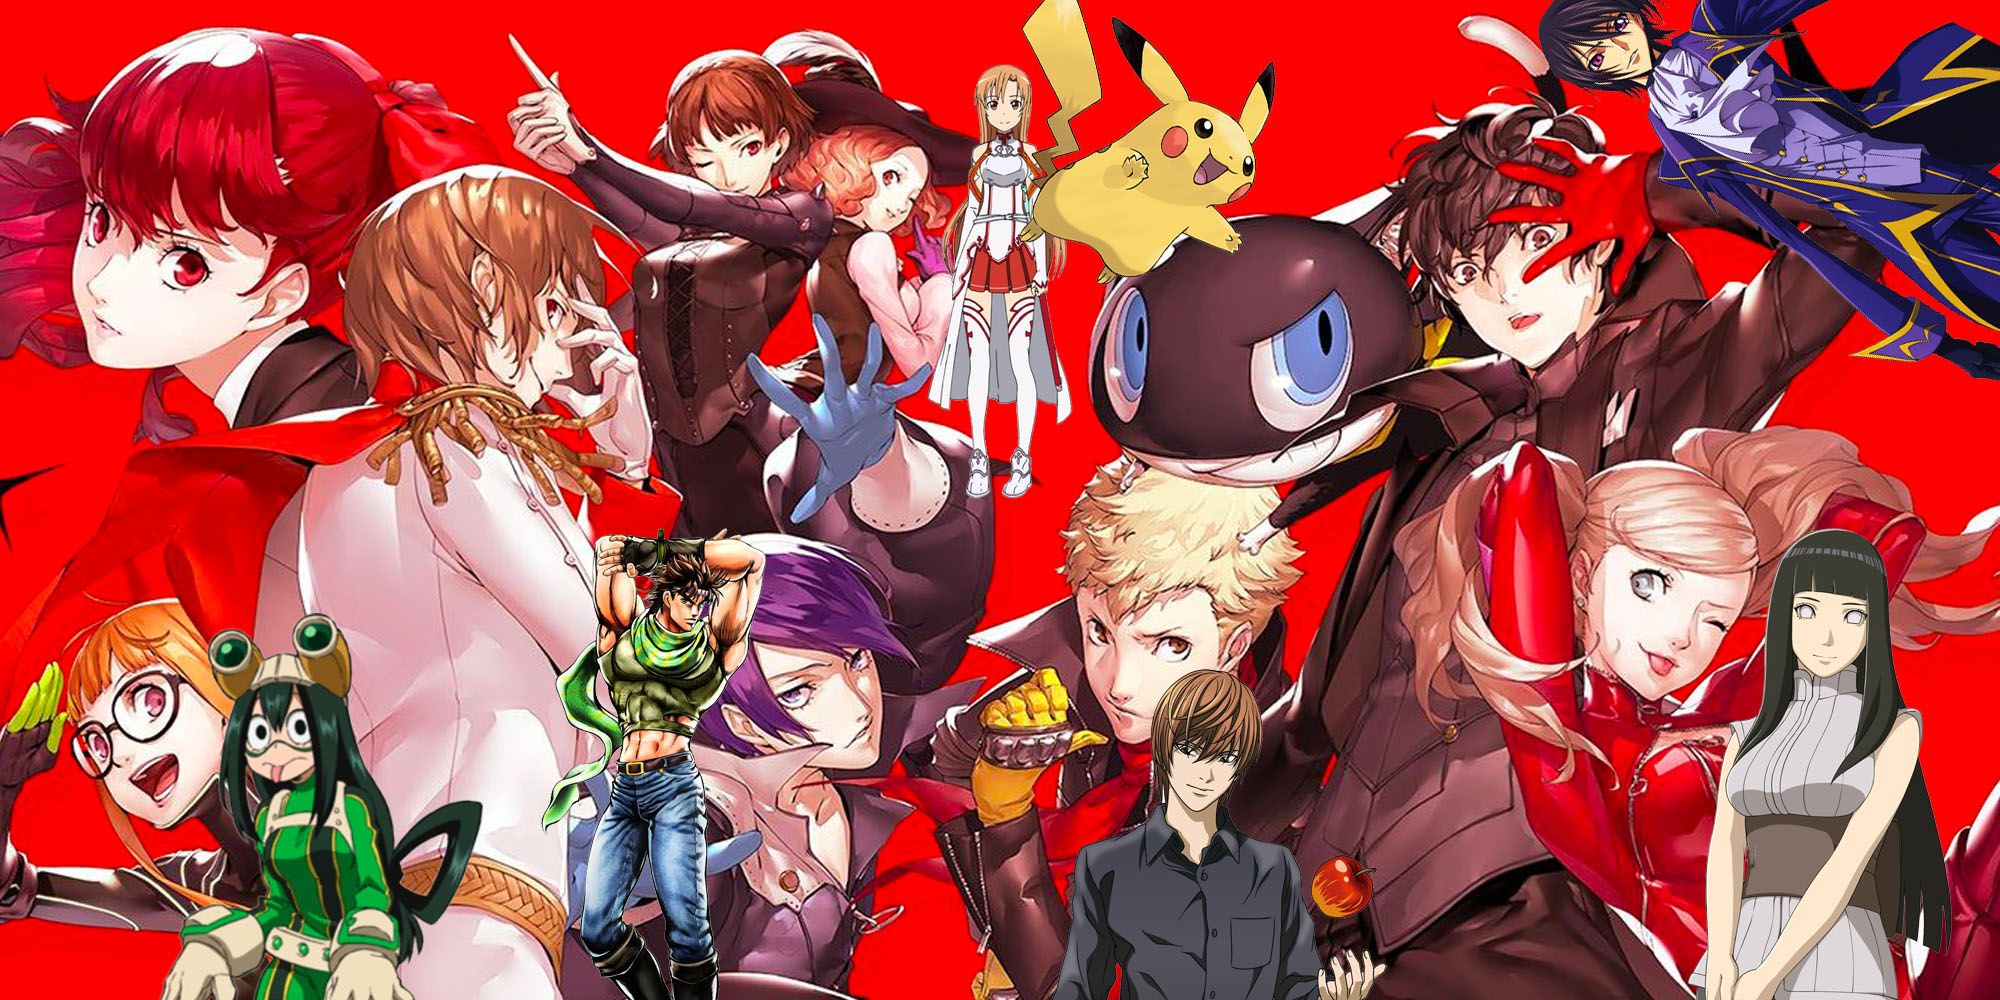 Persona 5 Japanese Voice Cast Is Anime Famous